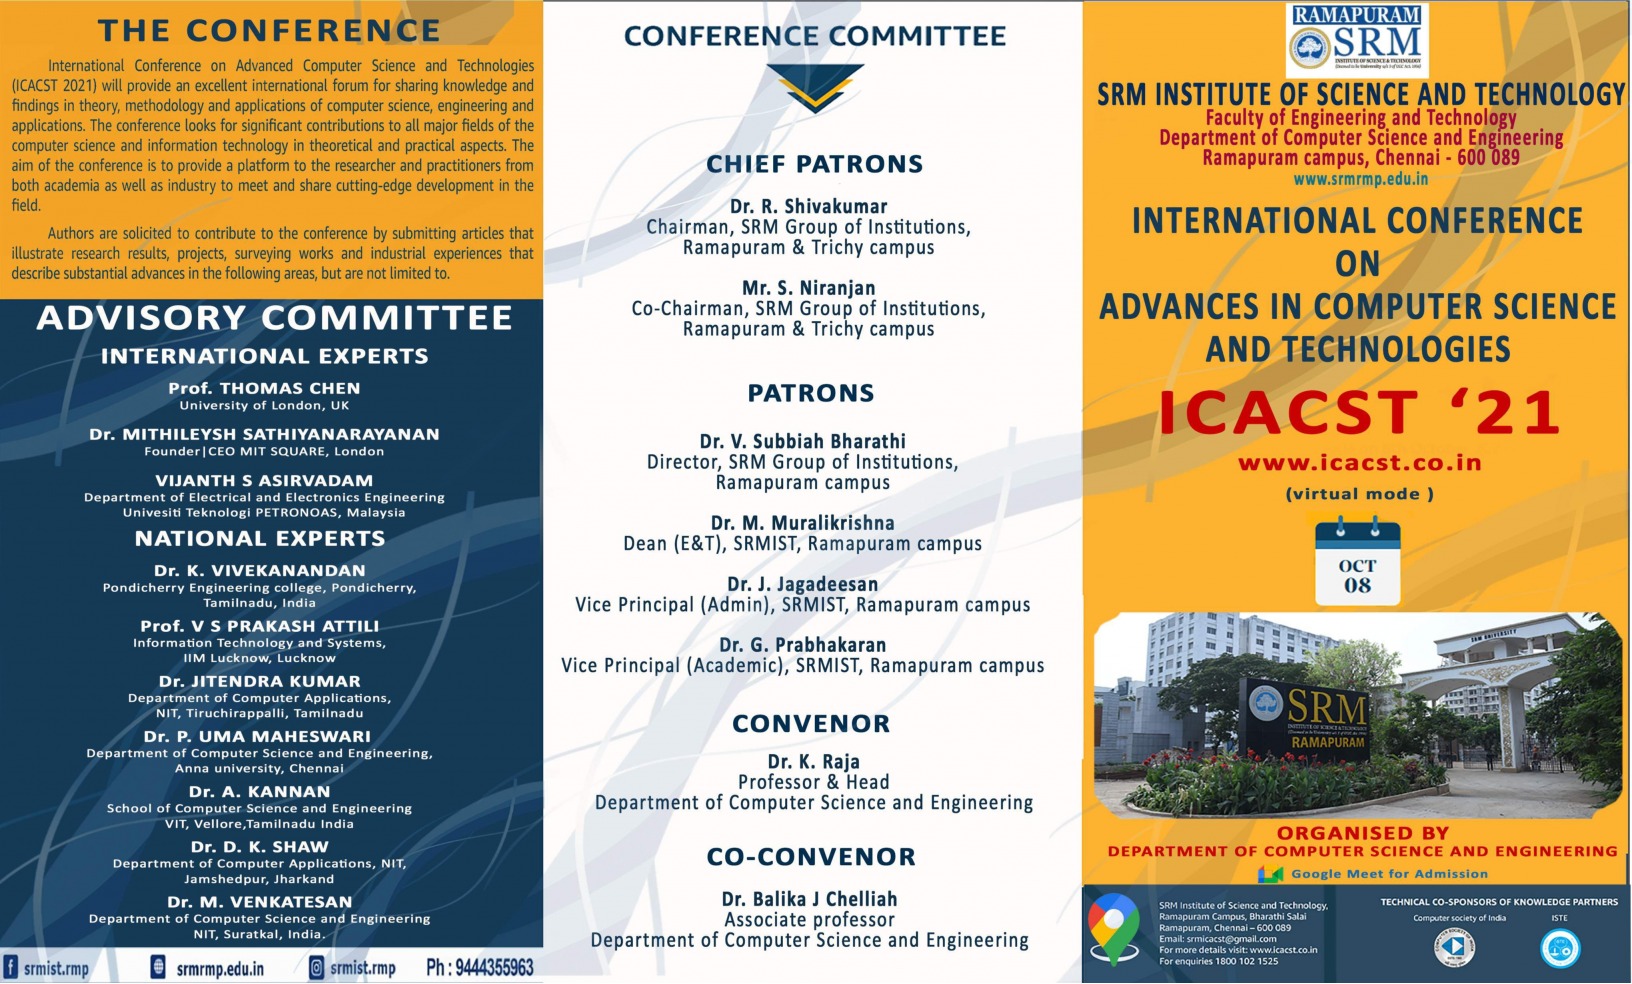 ICACST, INTERNATIONAL CONFERENCE ON ADVANCES IN COMPUTER SCIENCE AND TECHNOLOGIES